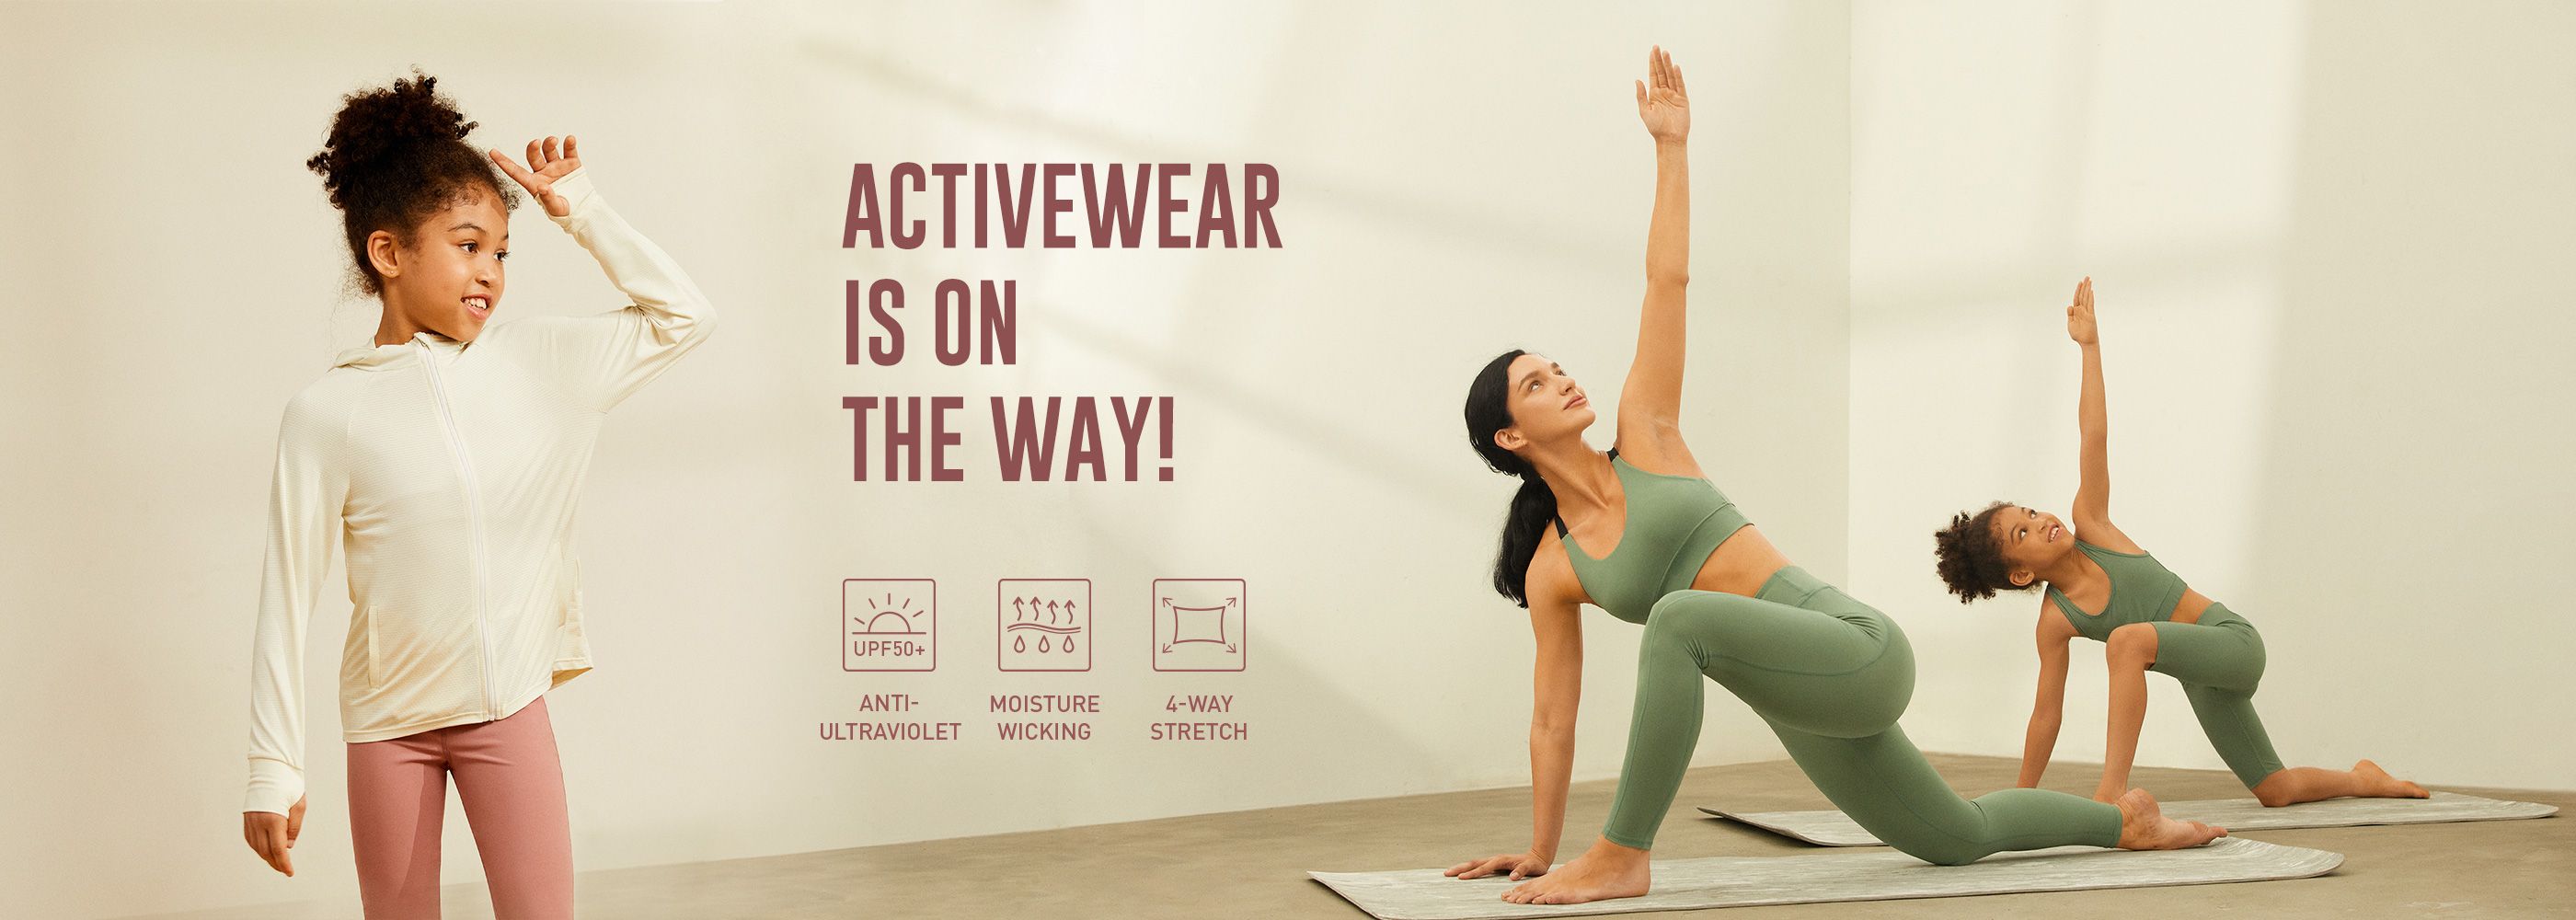 Activewear is on the way